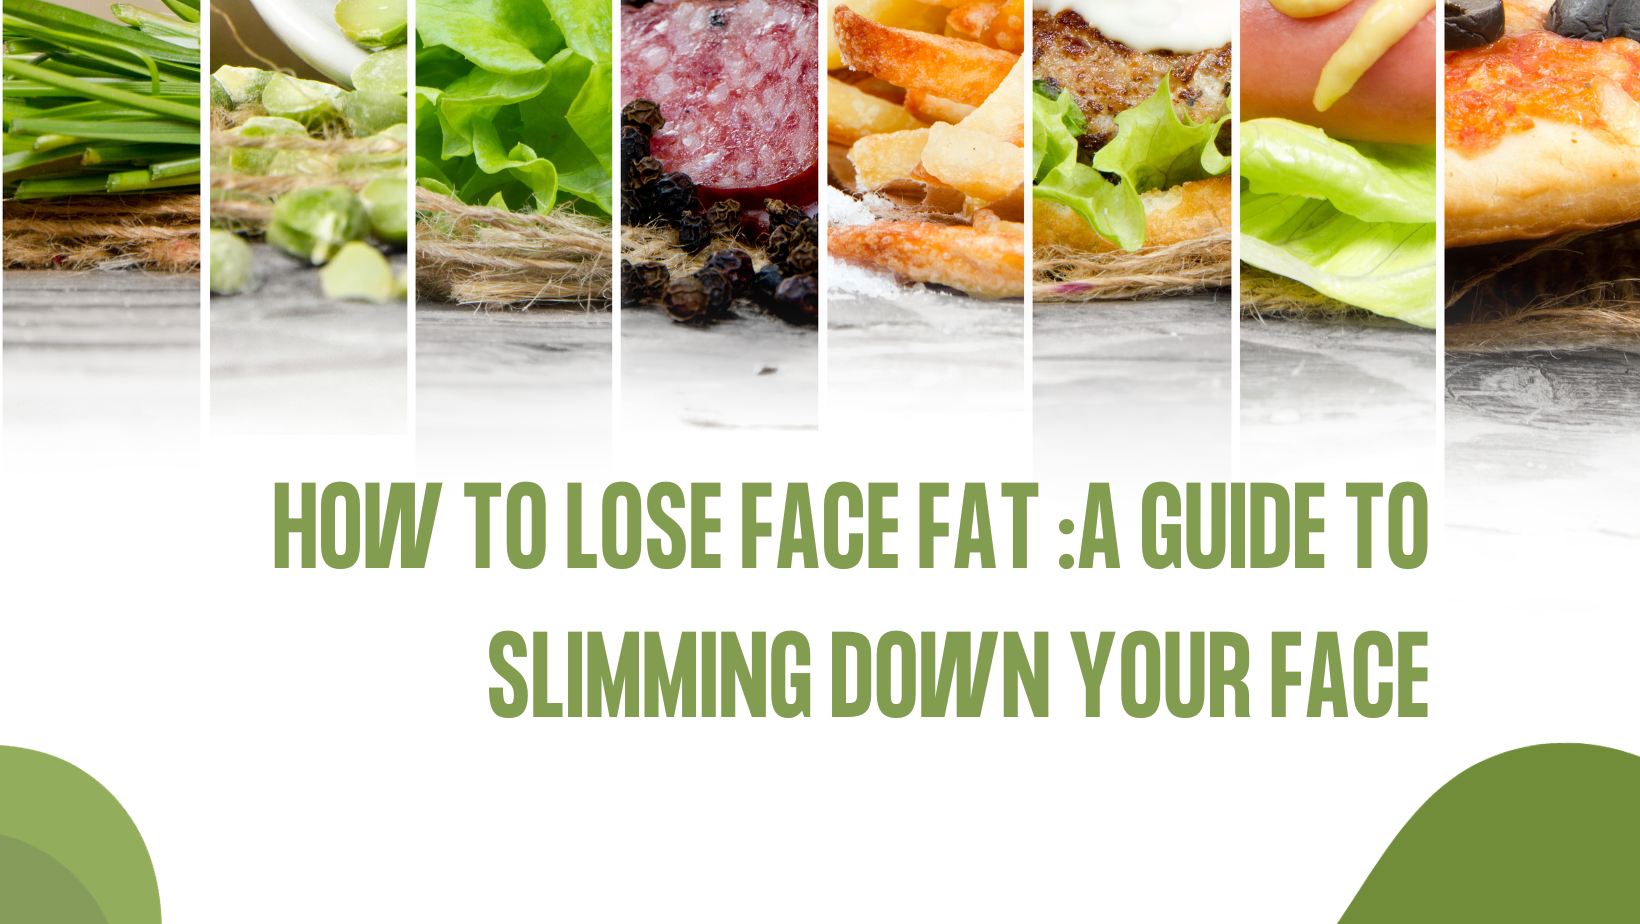 How to lose Face Fat :A Guide to Slimming Down Your Face